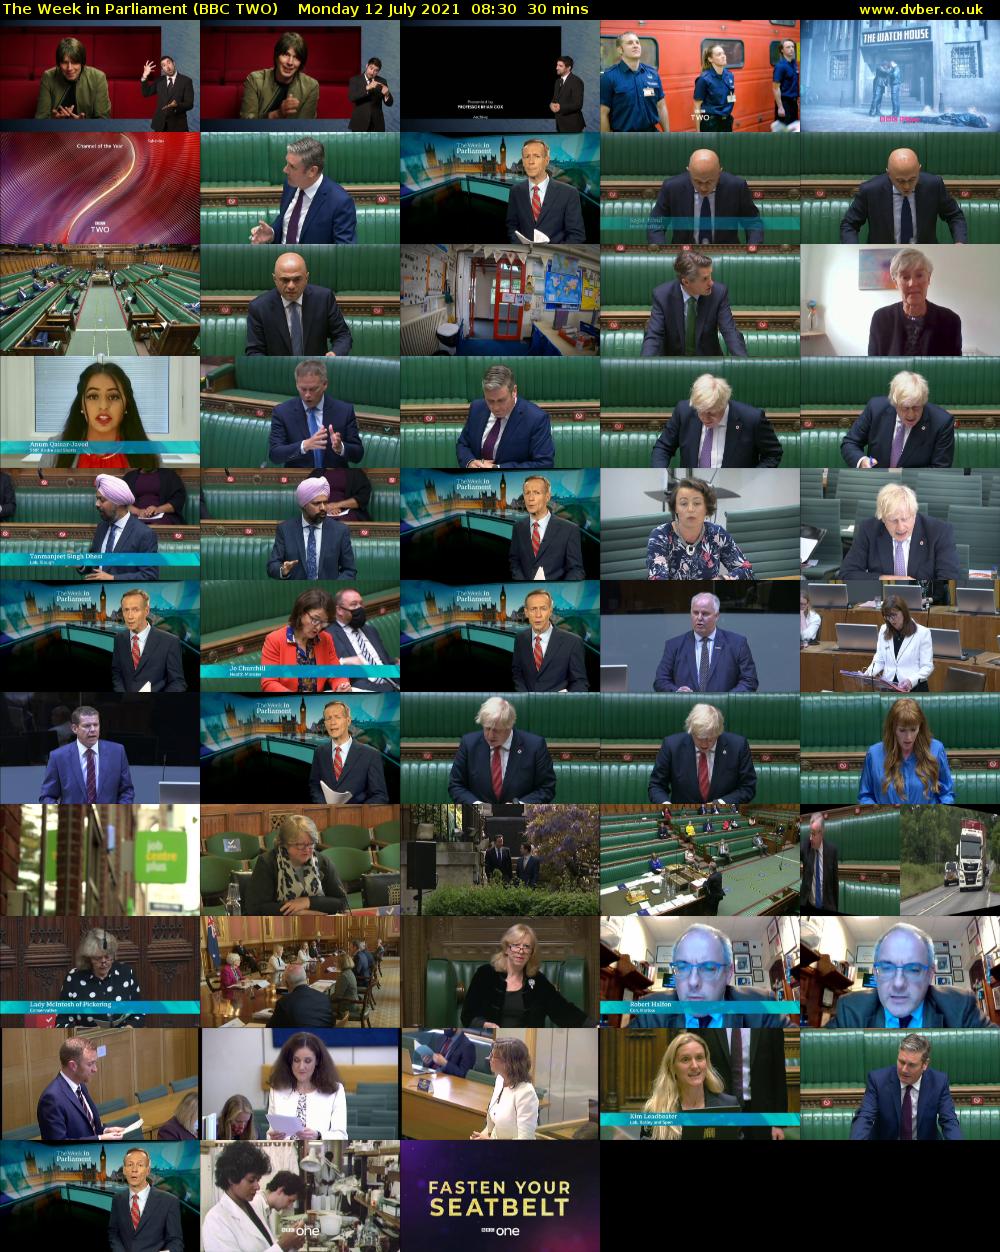 The Week in Parliament (BBC TWO) Monday 12 July 2021 08:30 - 09:00